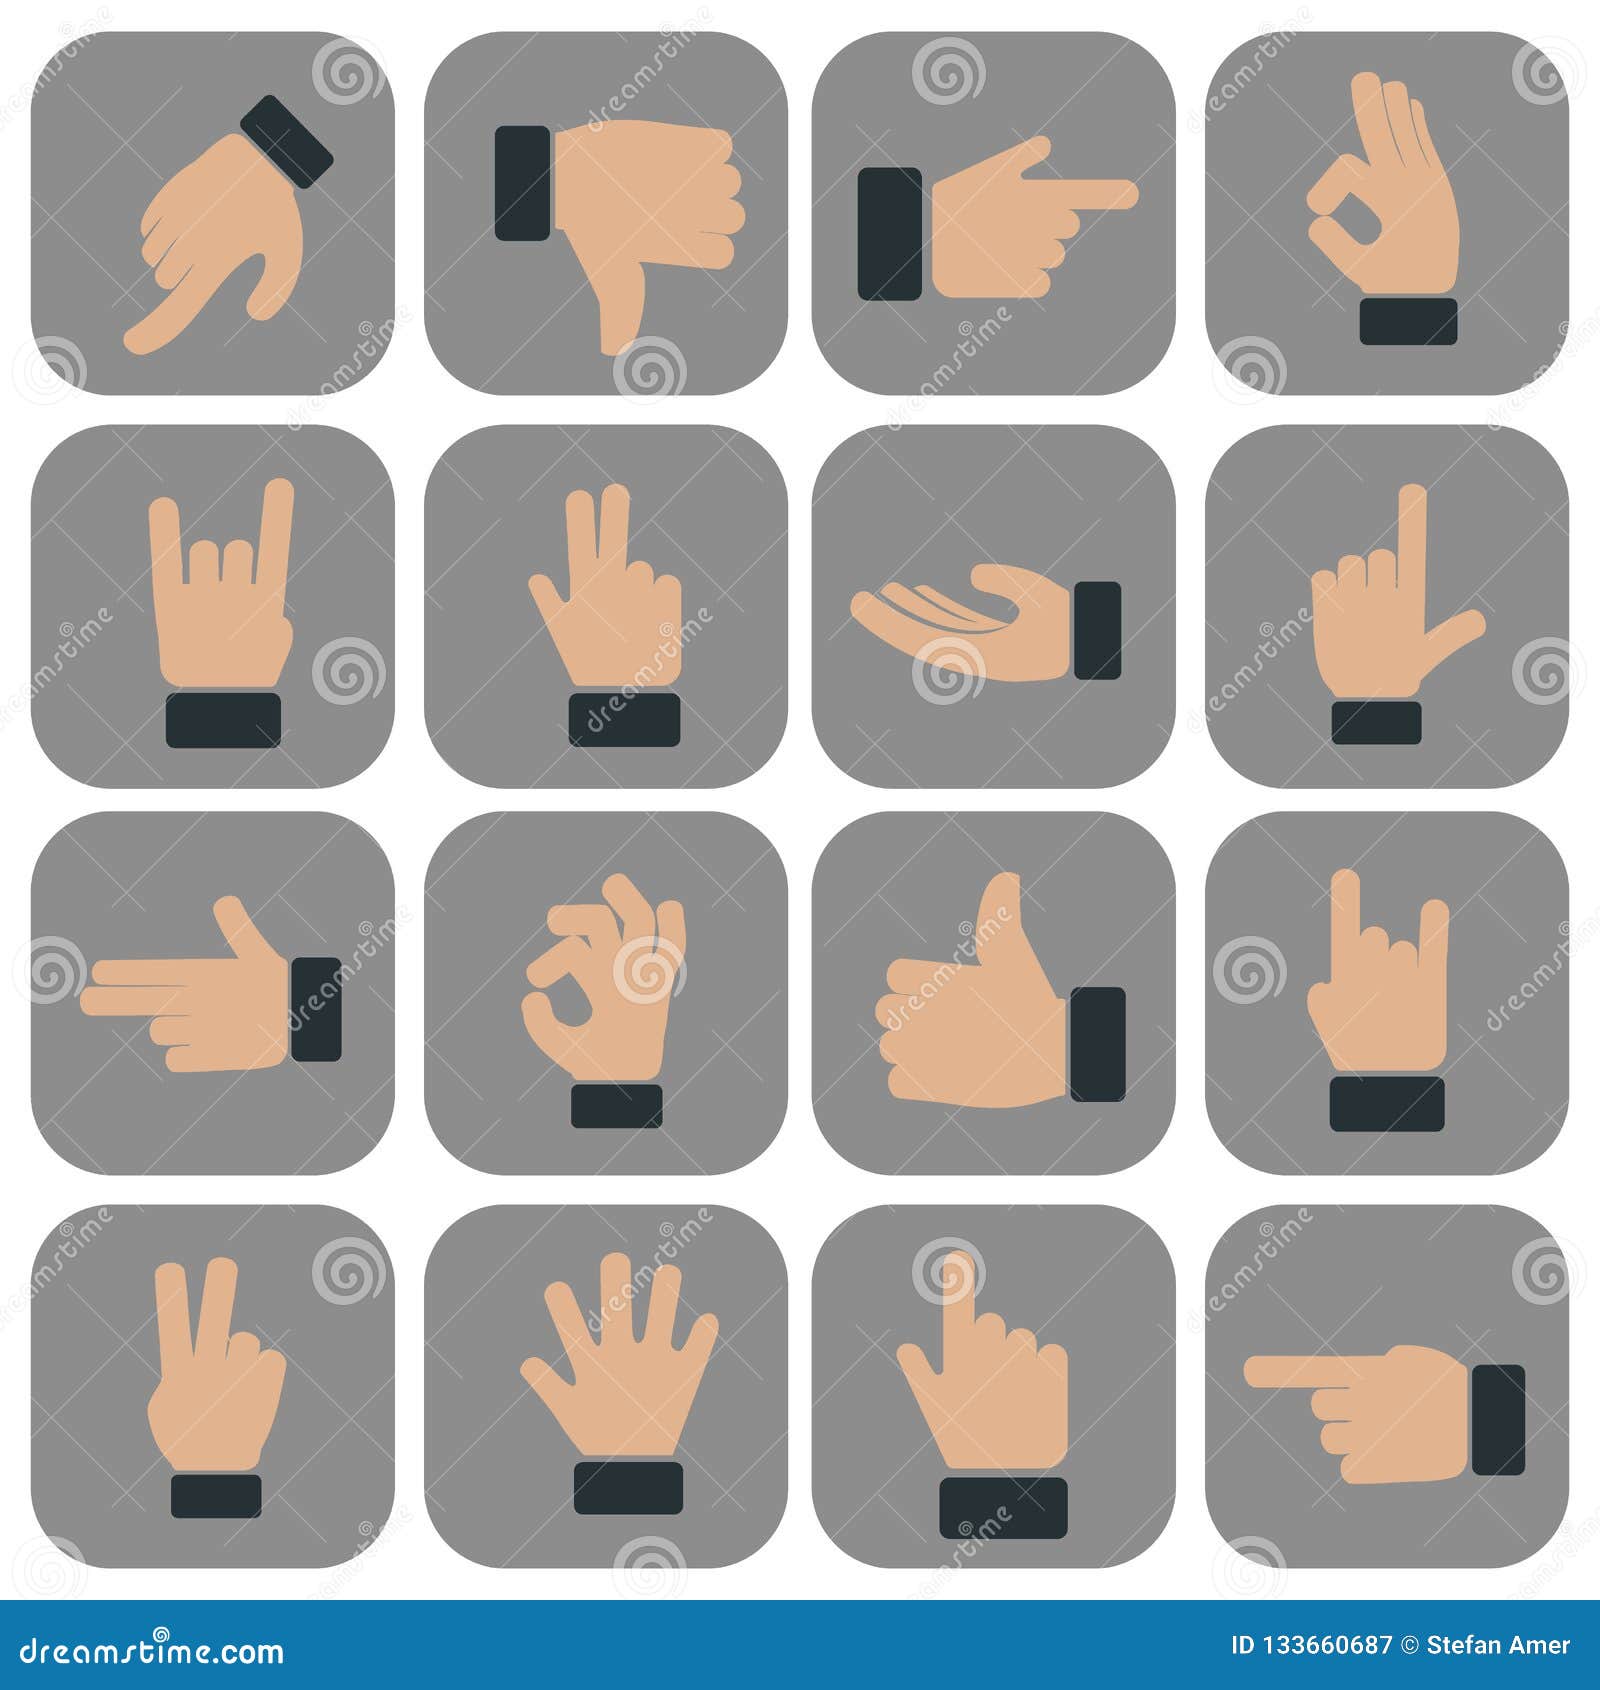 Human Hand Collection, Different Hands, Gestures, Signals and Signs